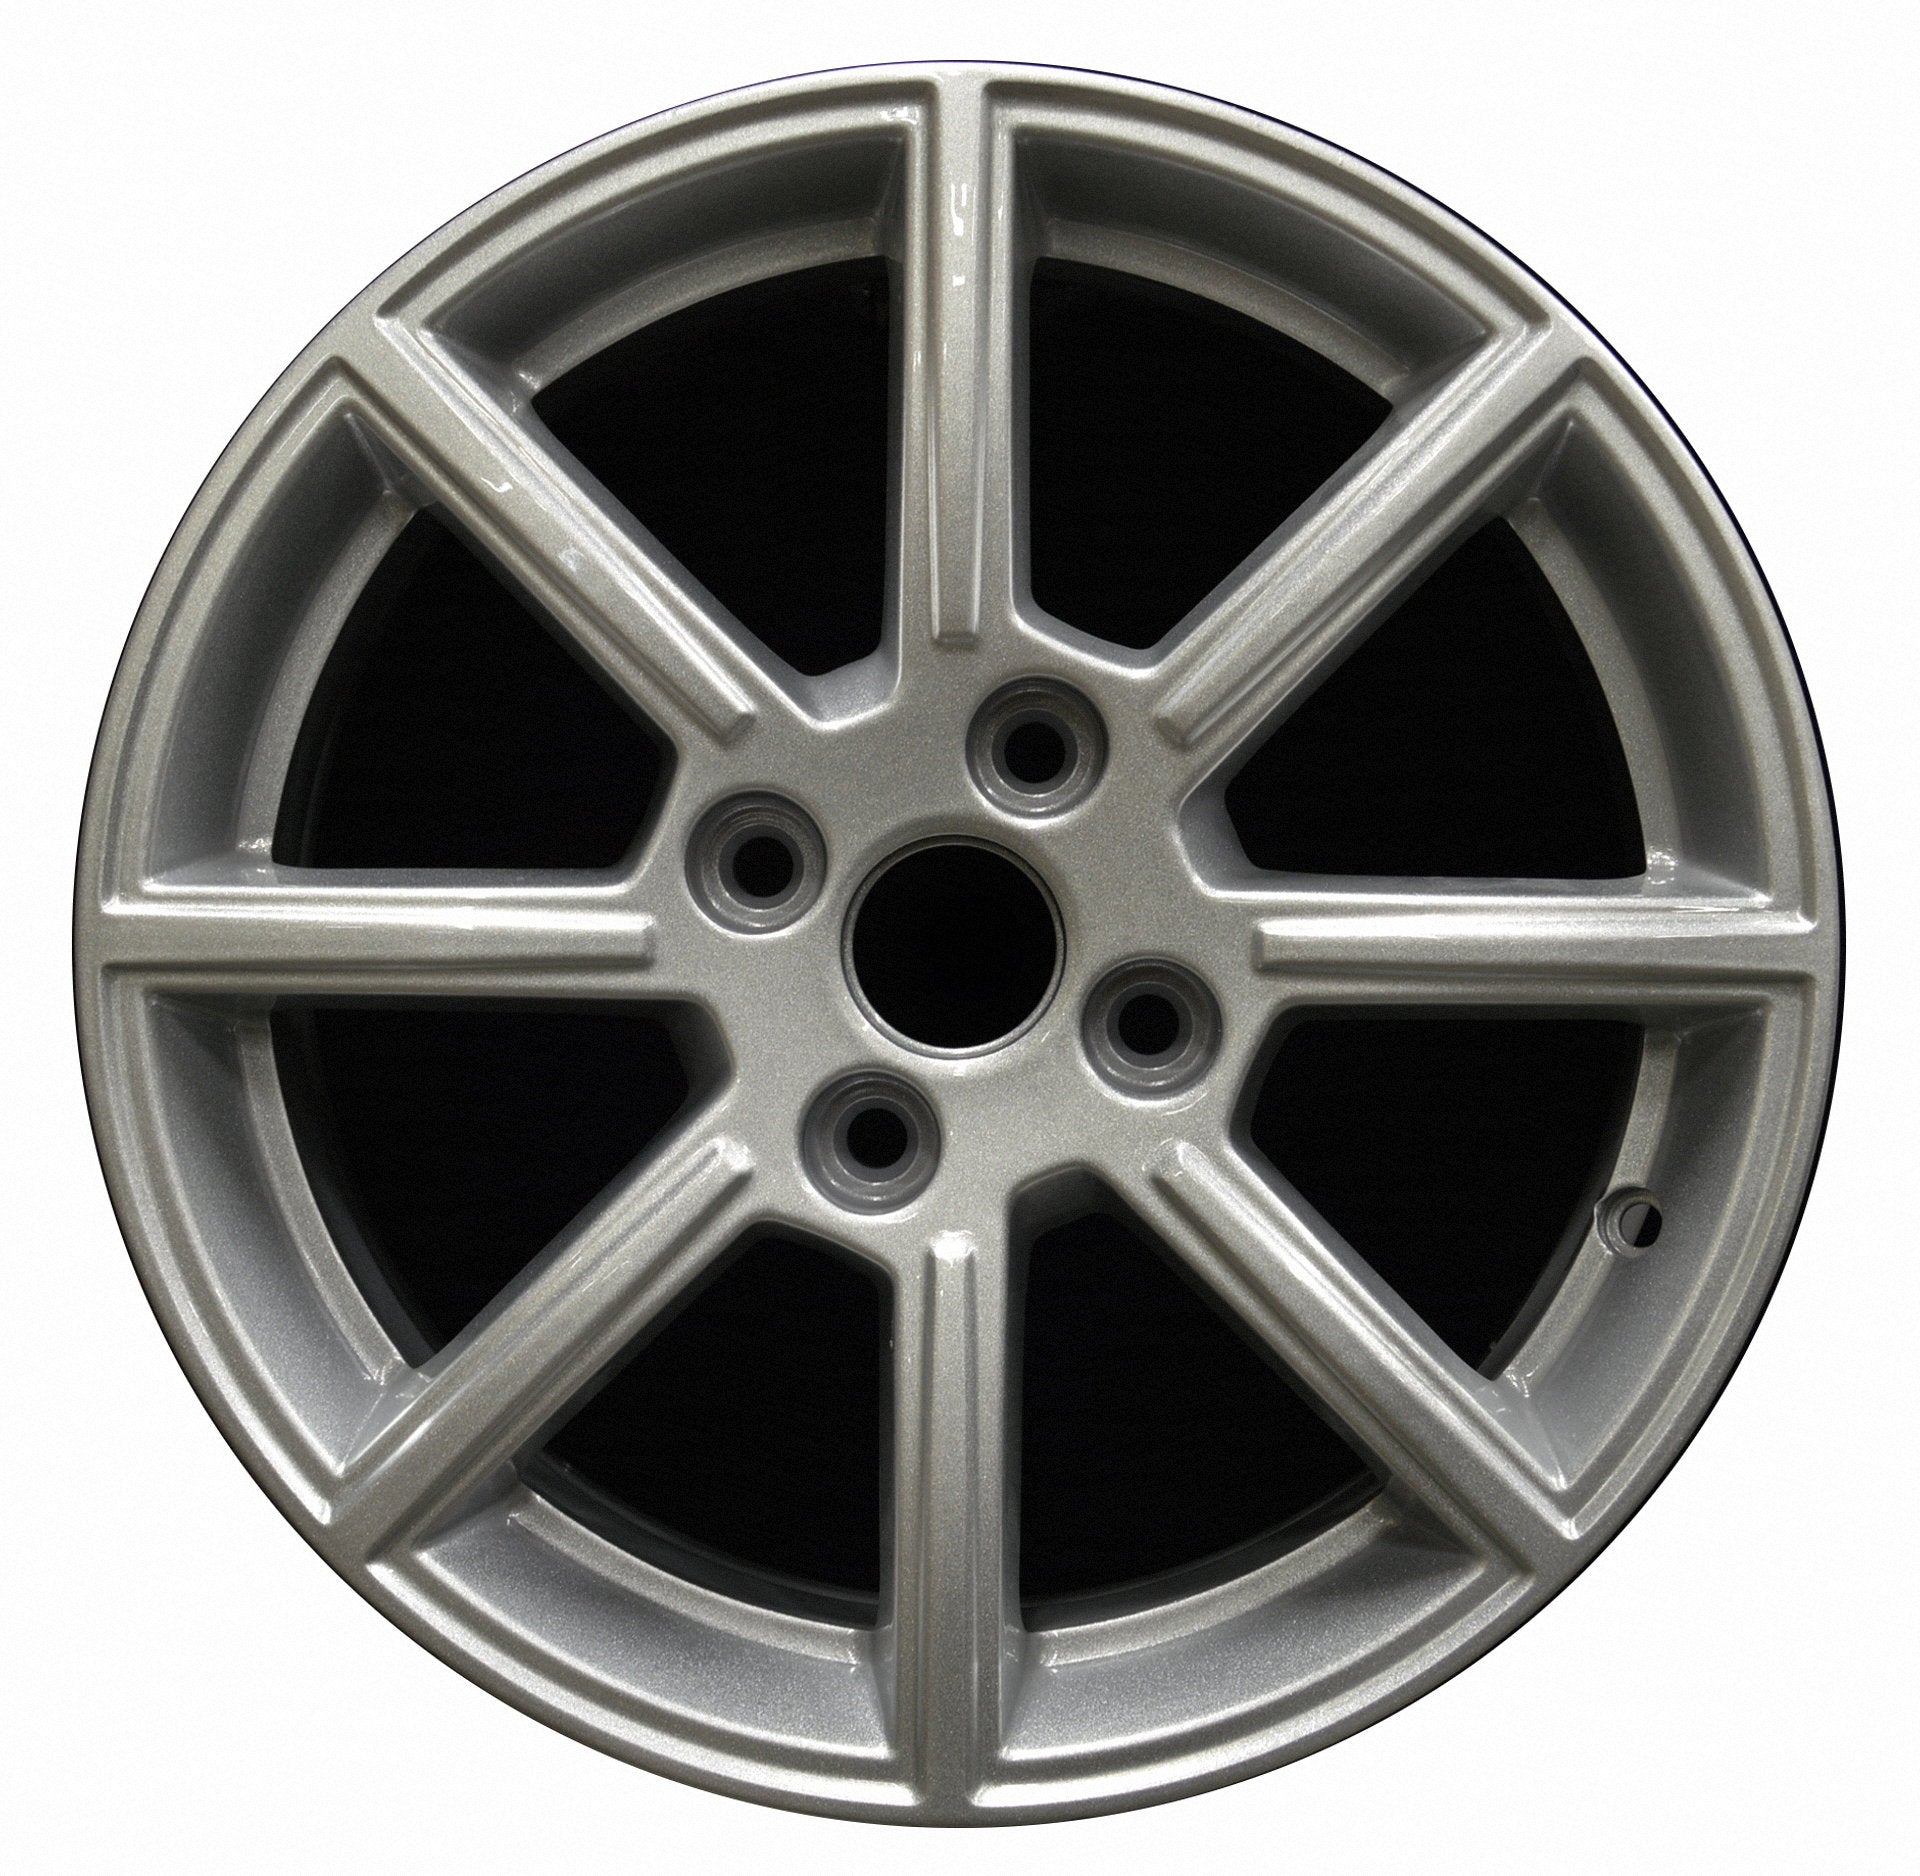 Ford Fiesta  2014, 2015, 2016, 2017, 2018, 2019 Factory OEM Car Wheel Size 16x6.5 Alloy WAO.10008.PS08.FF